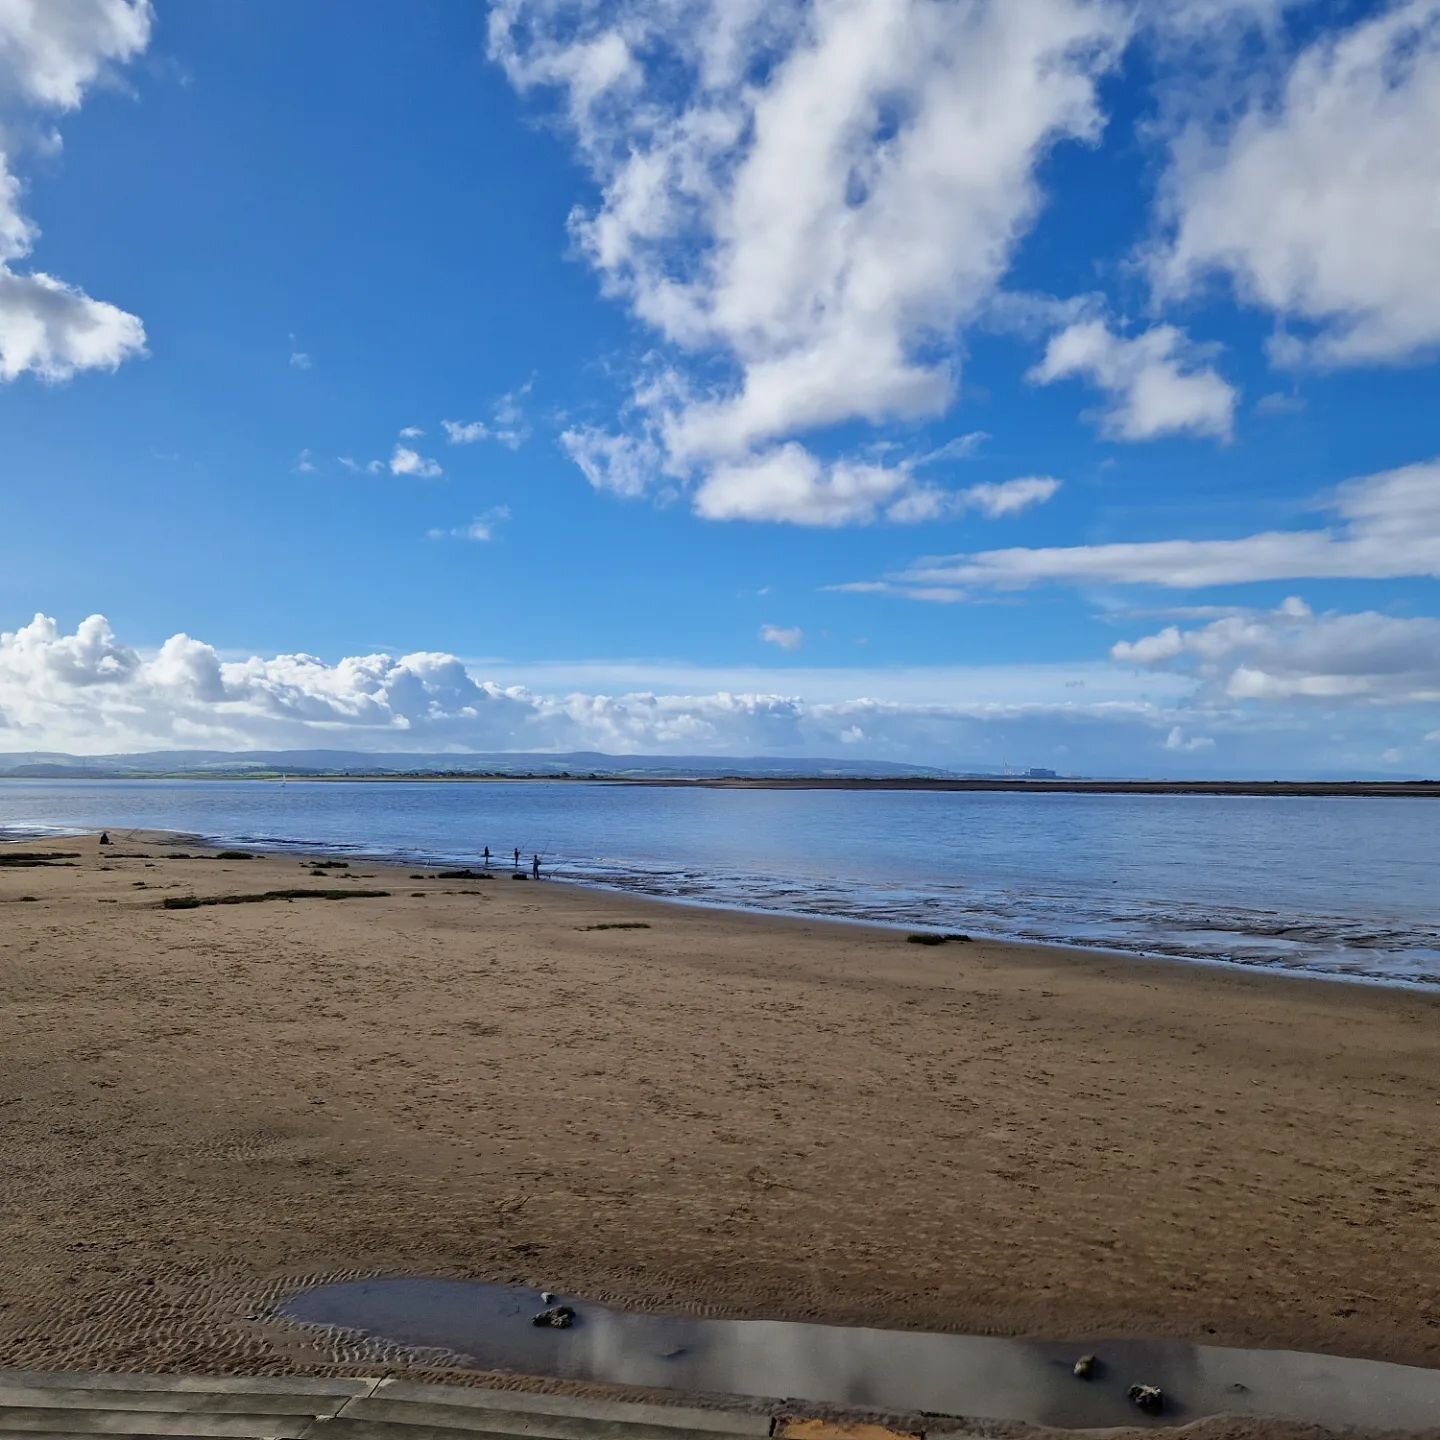 Sometimes we forget we're less than 20 minutes from the sea, but in the spirit of Being Better At Marketing, did you know we're less than 20 minutes from the sea? These pics are from Berrow and looking across the river Brue near Burnham on Sea. What 